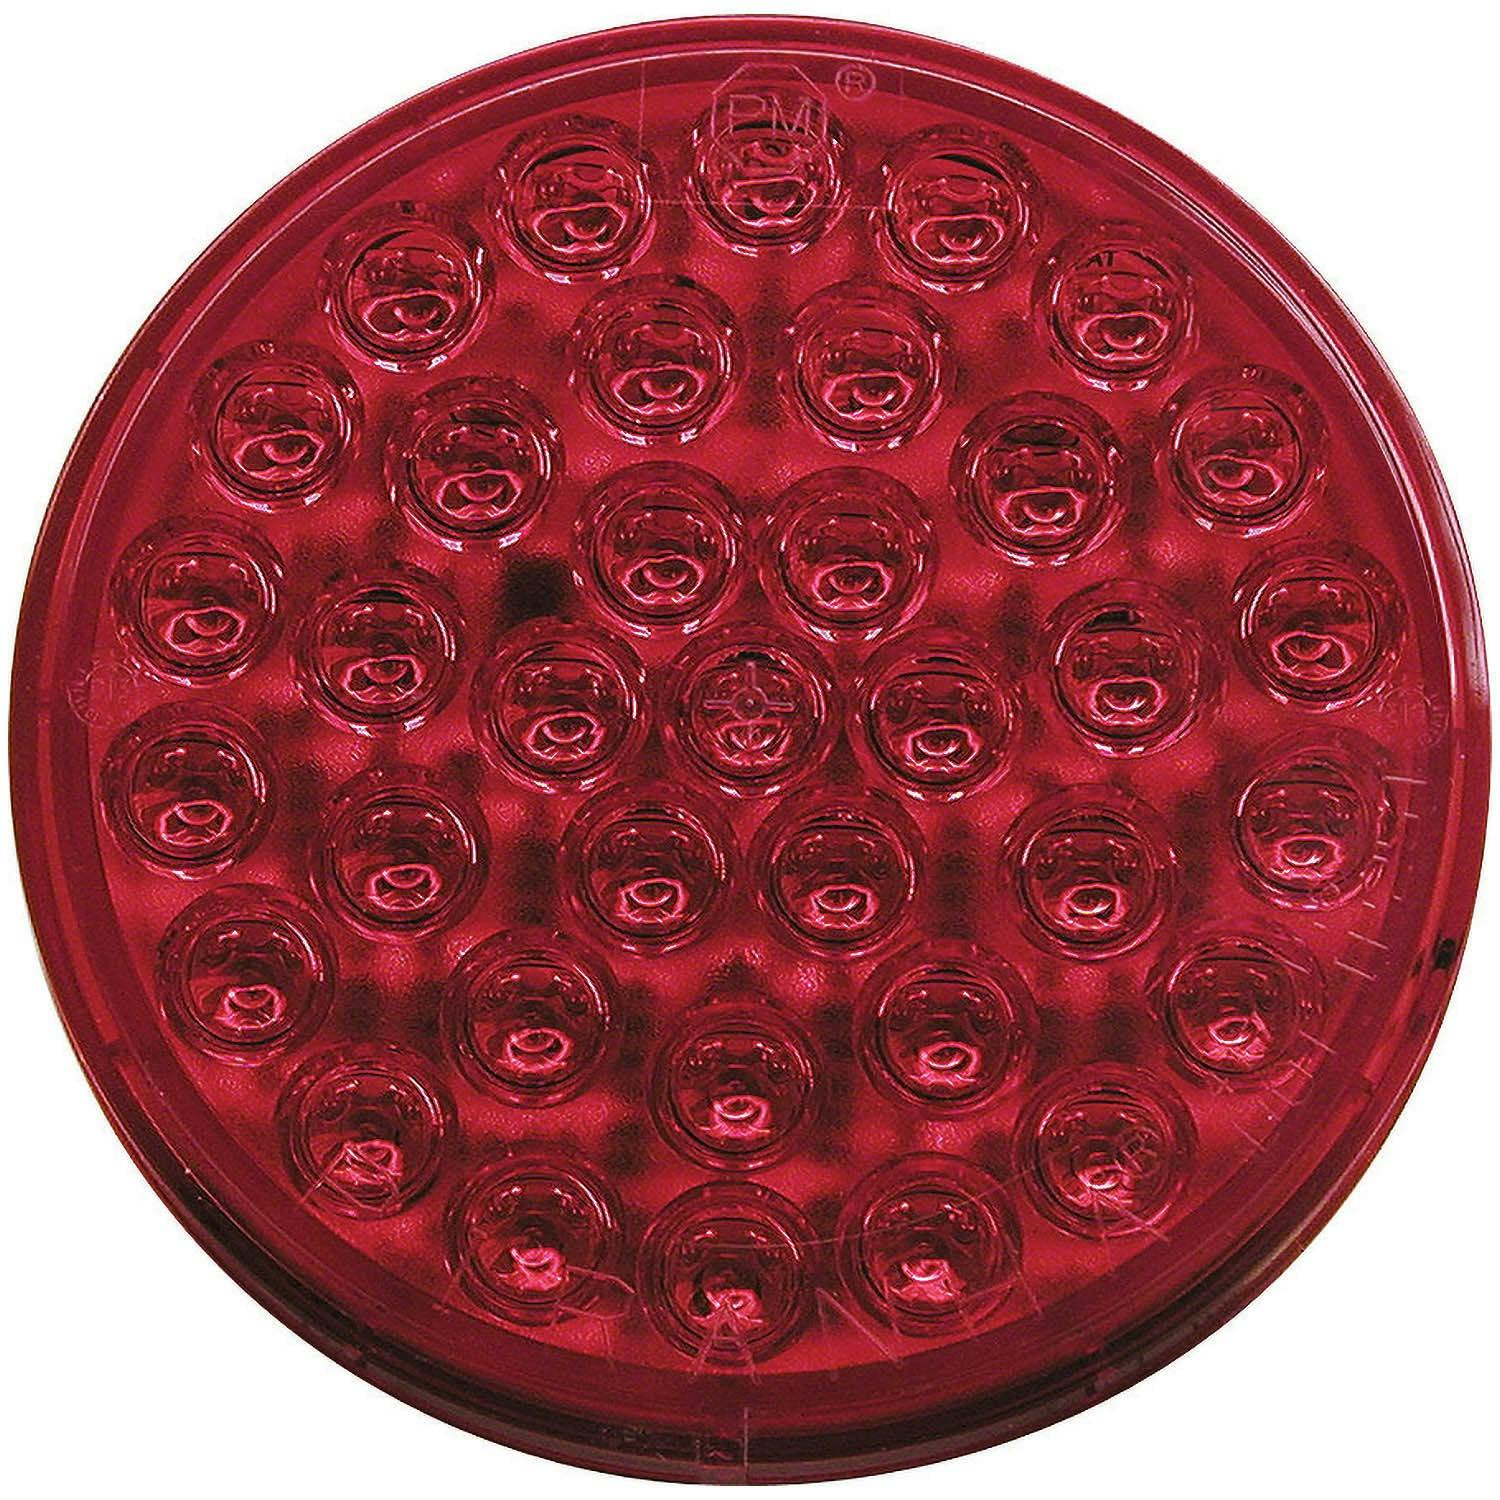 LED Stop/Turn/Tail, Round, AMP, Grommet-Mount, 4", red, bulk pack (Pack of 50)